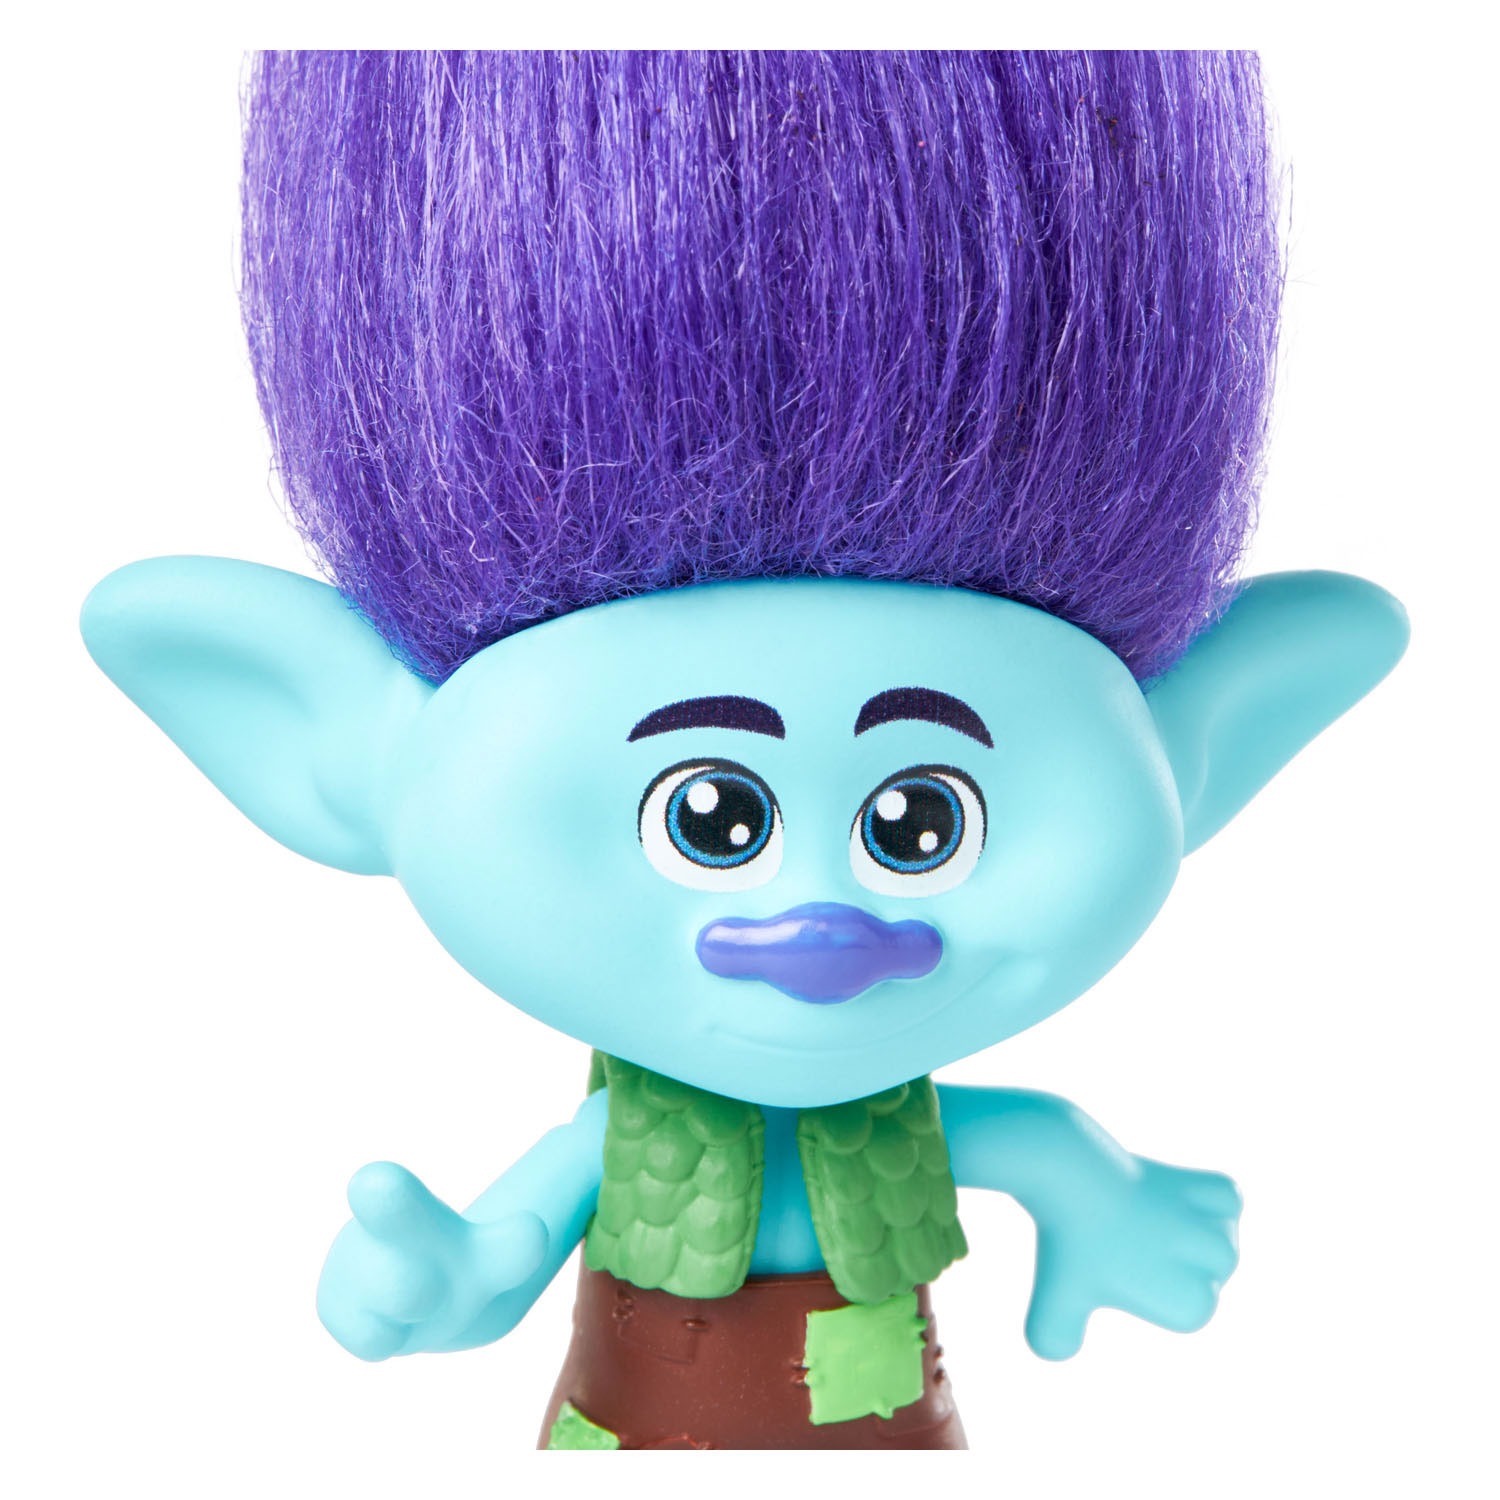 Trolls 3 Band Together Branch Small Pop